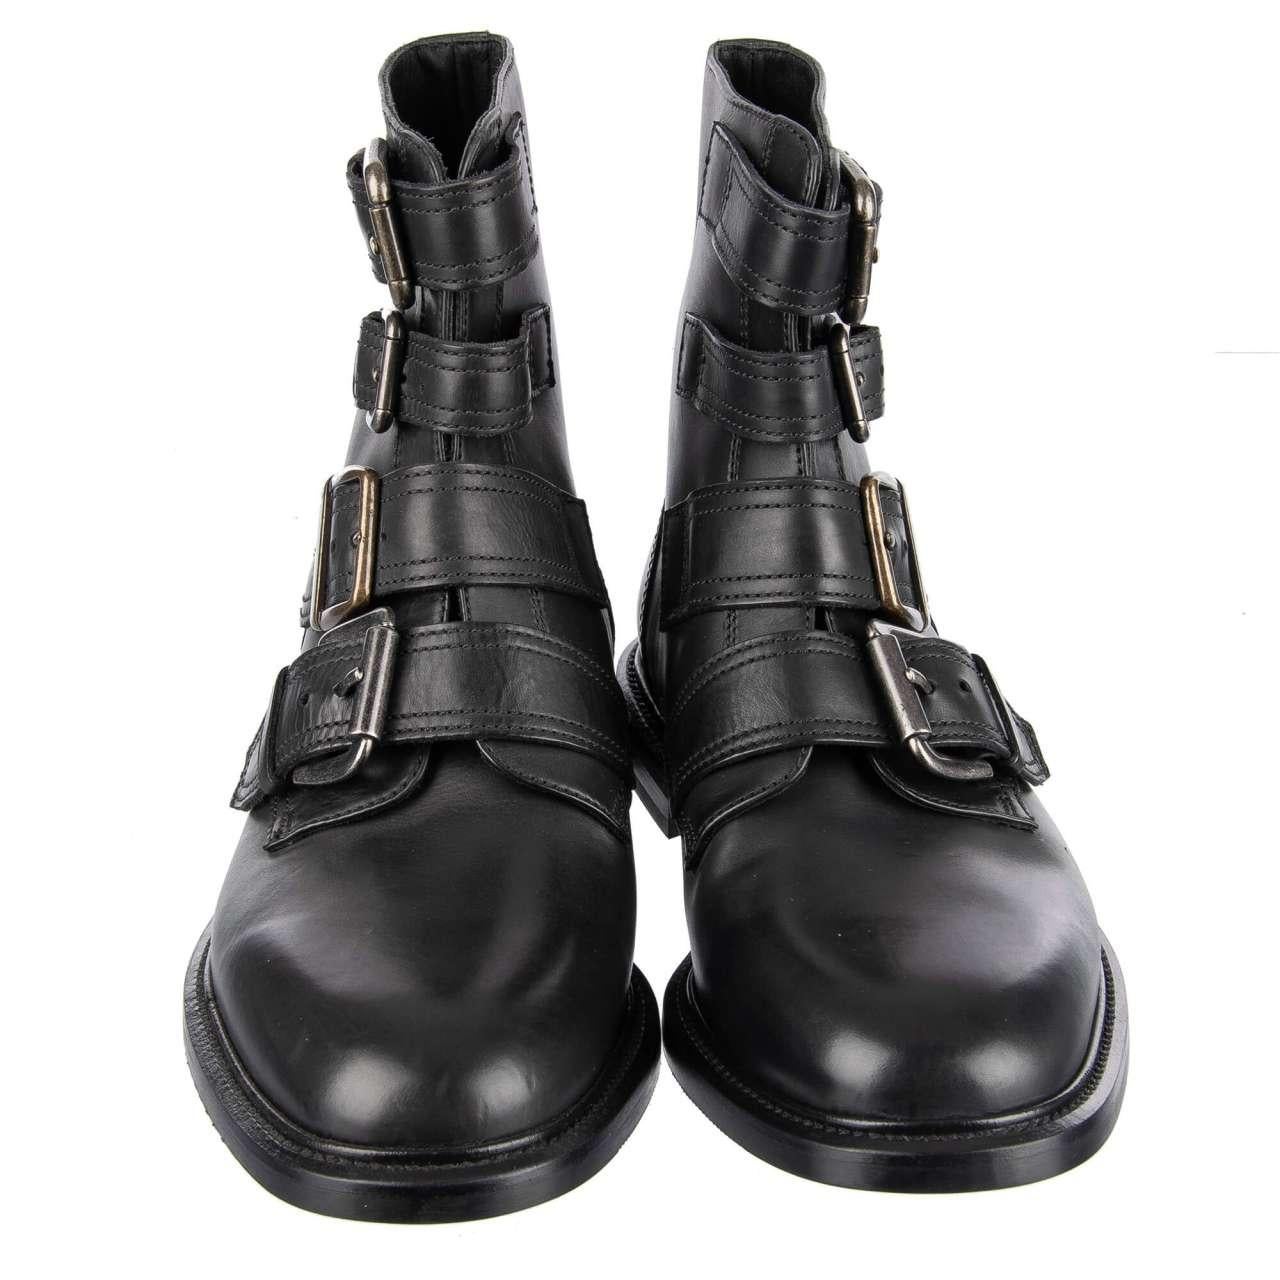 Dolce & Gabbana - Ankle Boots with Buckles MARSALA Black EUR 42 For Sale 3